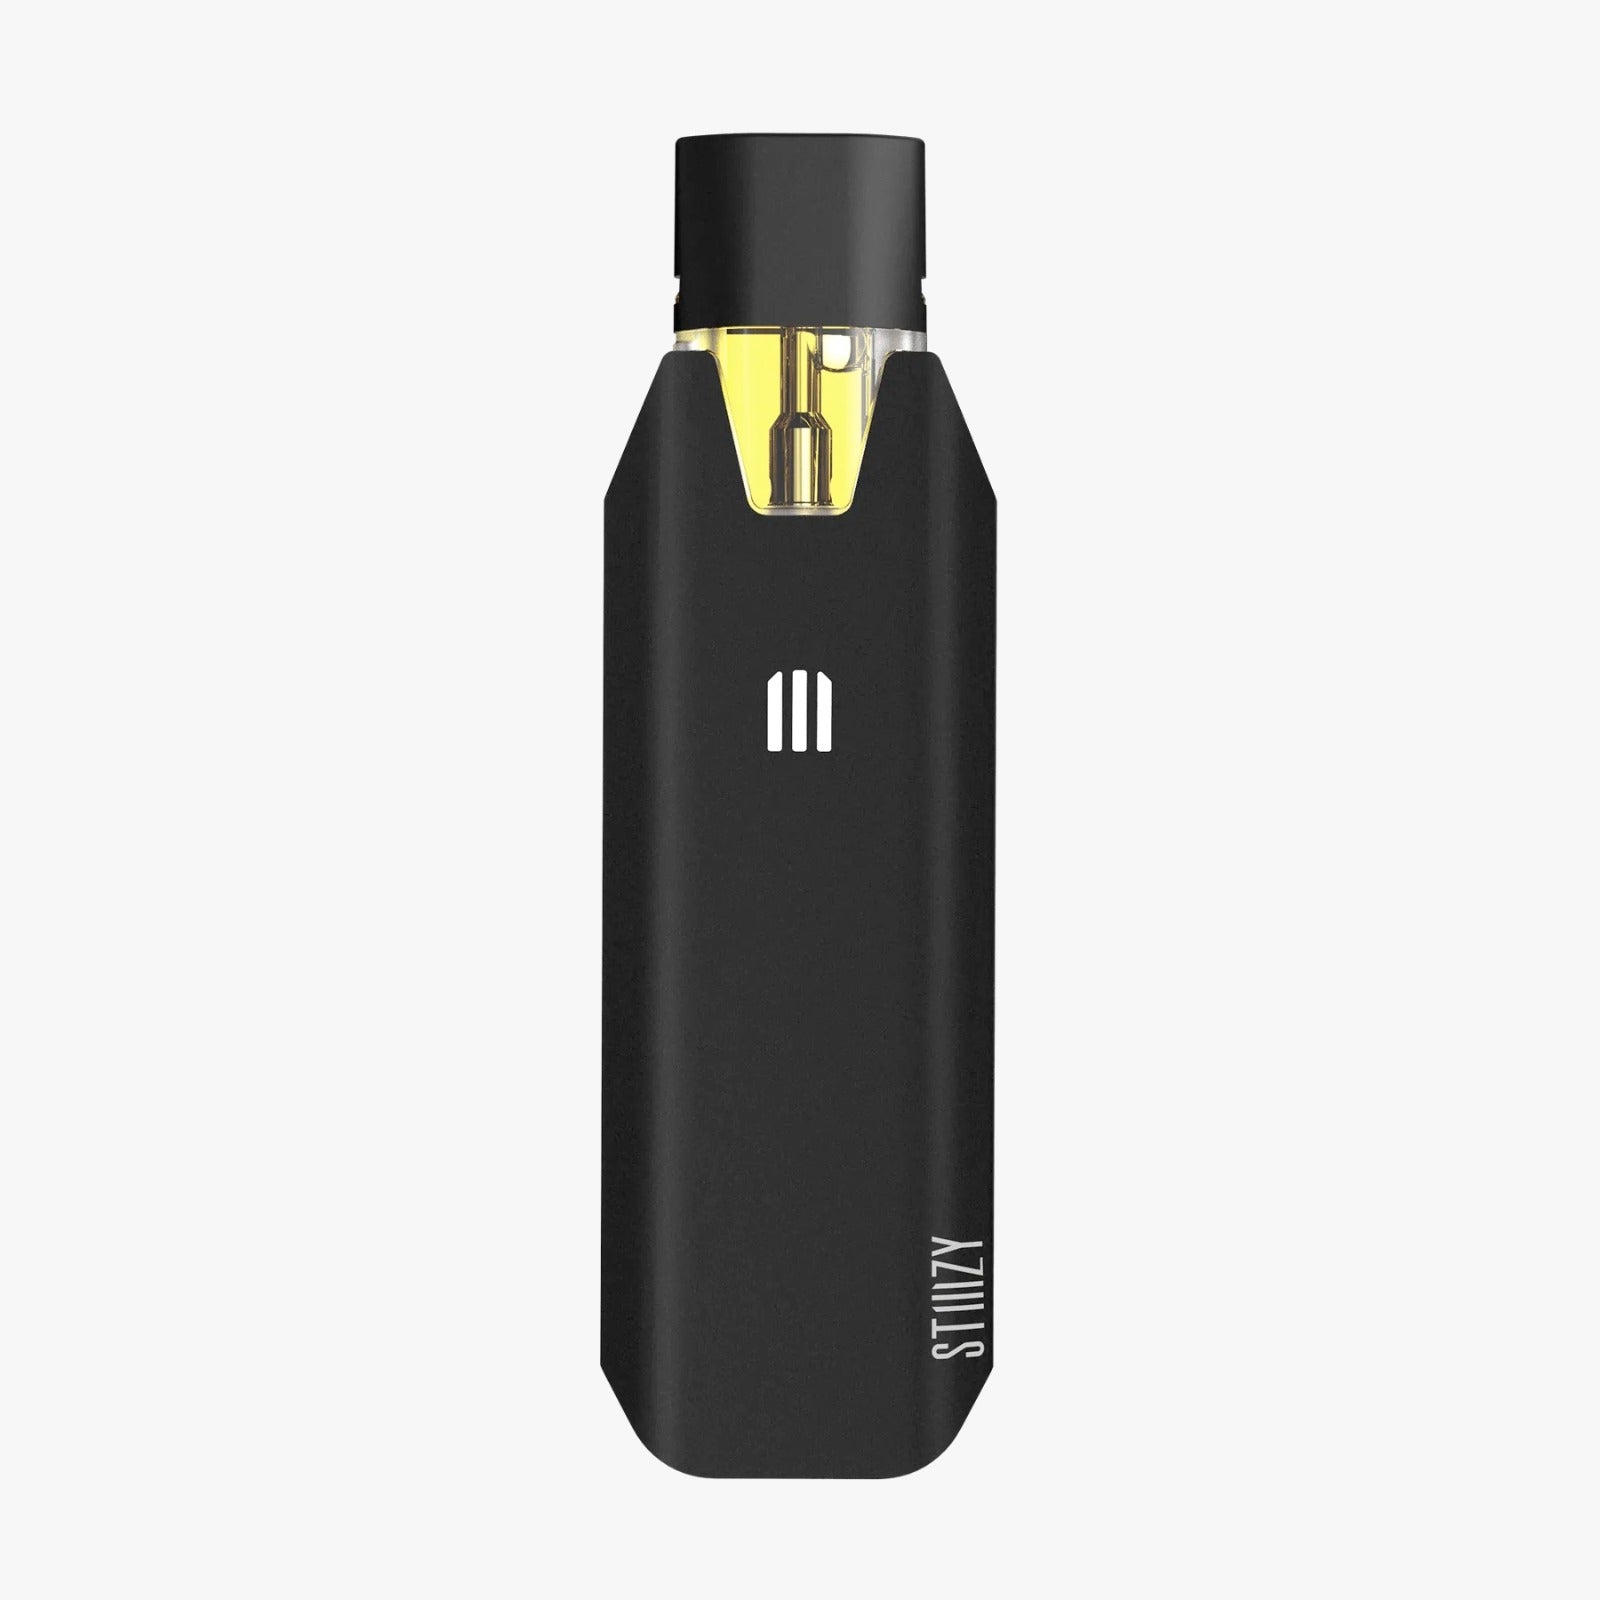 A big black STIIIZY weed pen battery and vape pod stand against a white background.